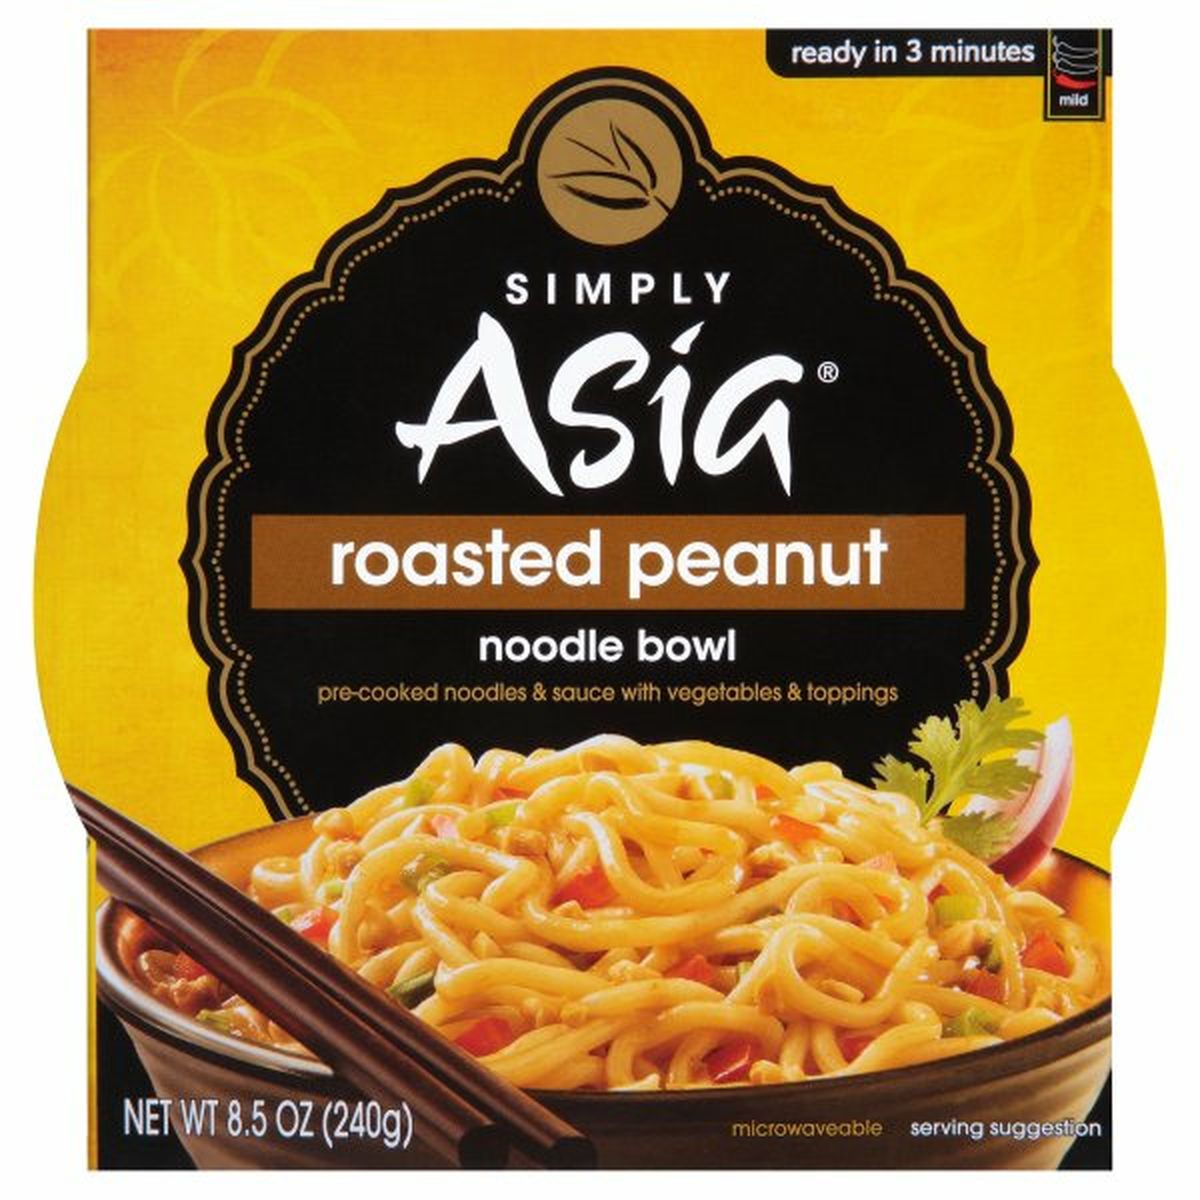 Calories in Simply Asias  Roasted Peanut Noodle Bowl